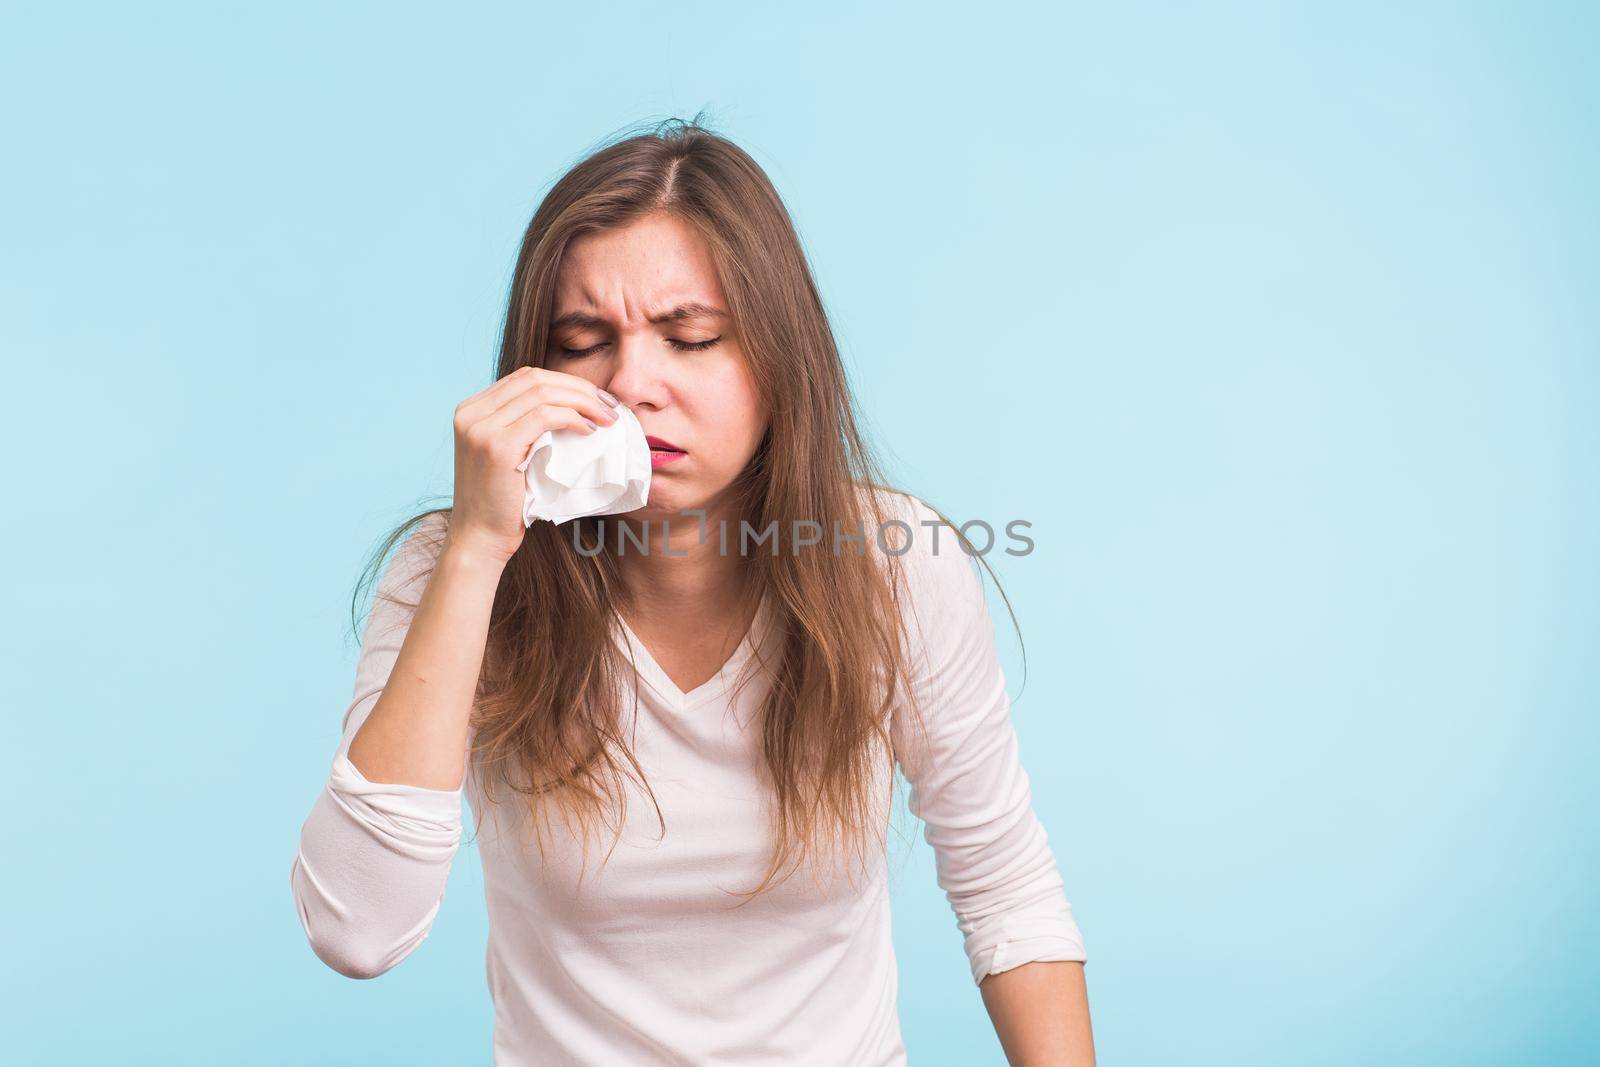 Young woman has a runny nose on blue background by Satura86